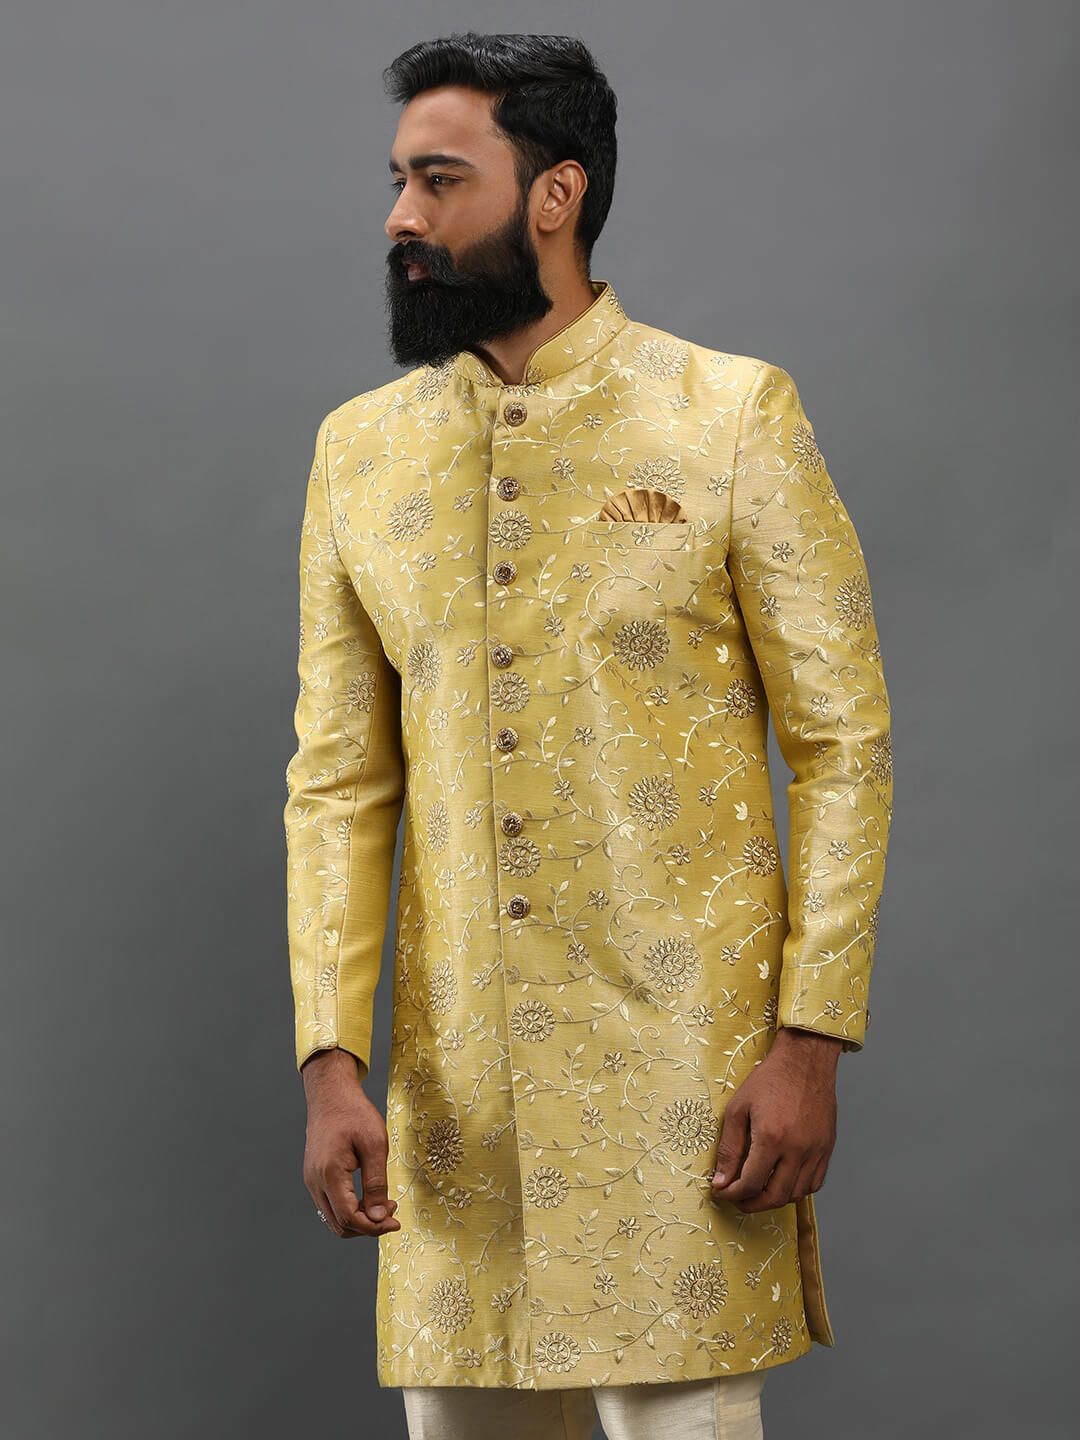 subtle-yellow-floral-embroidered-sherwani